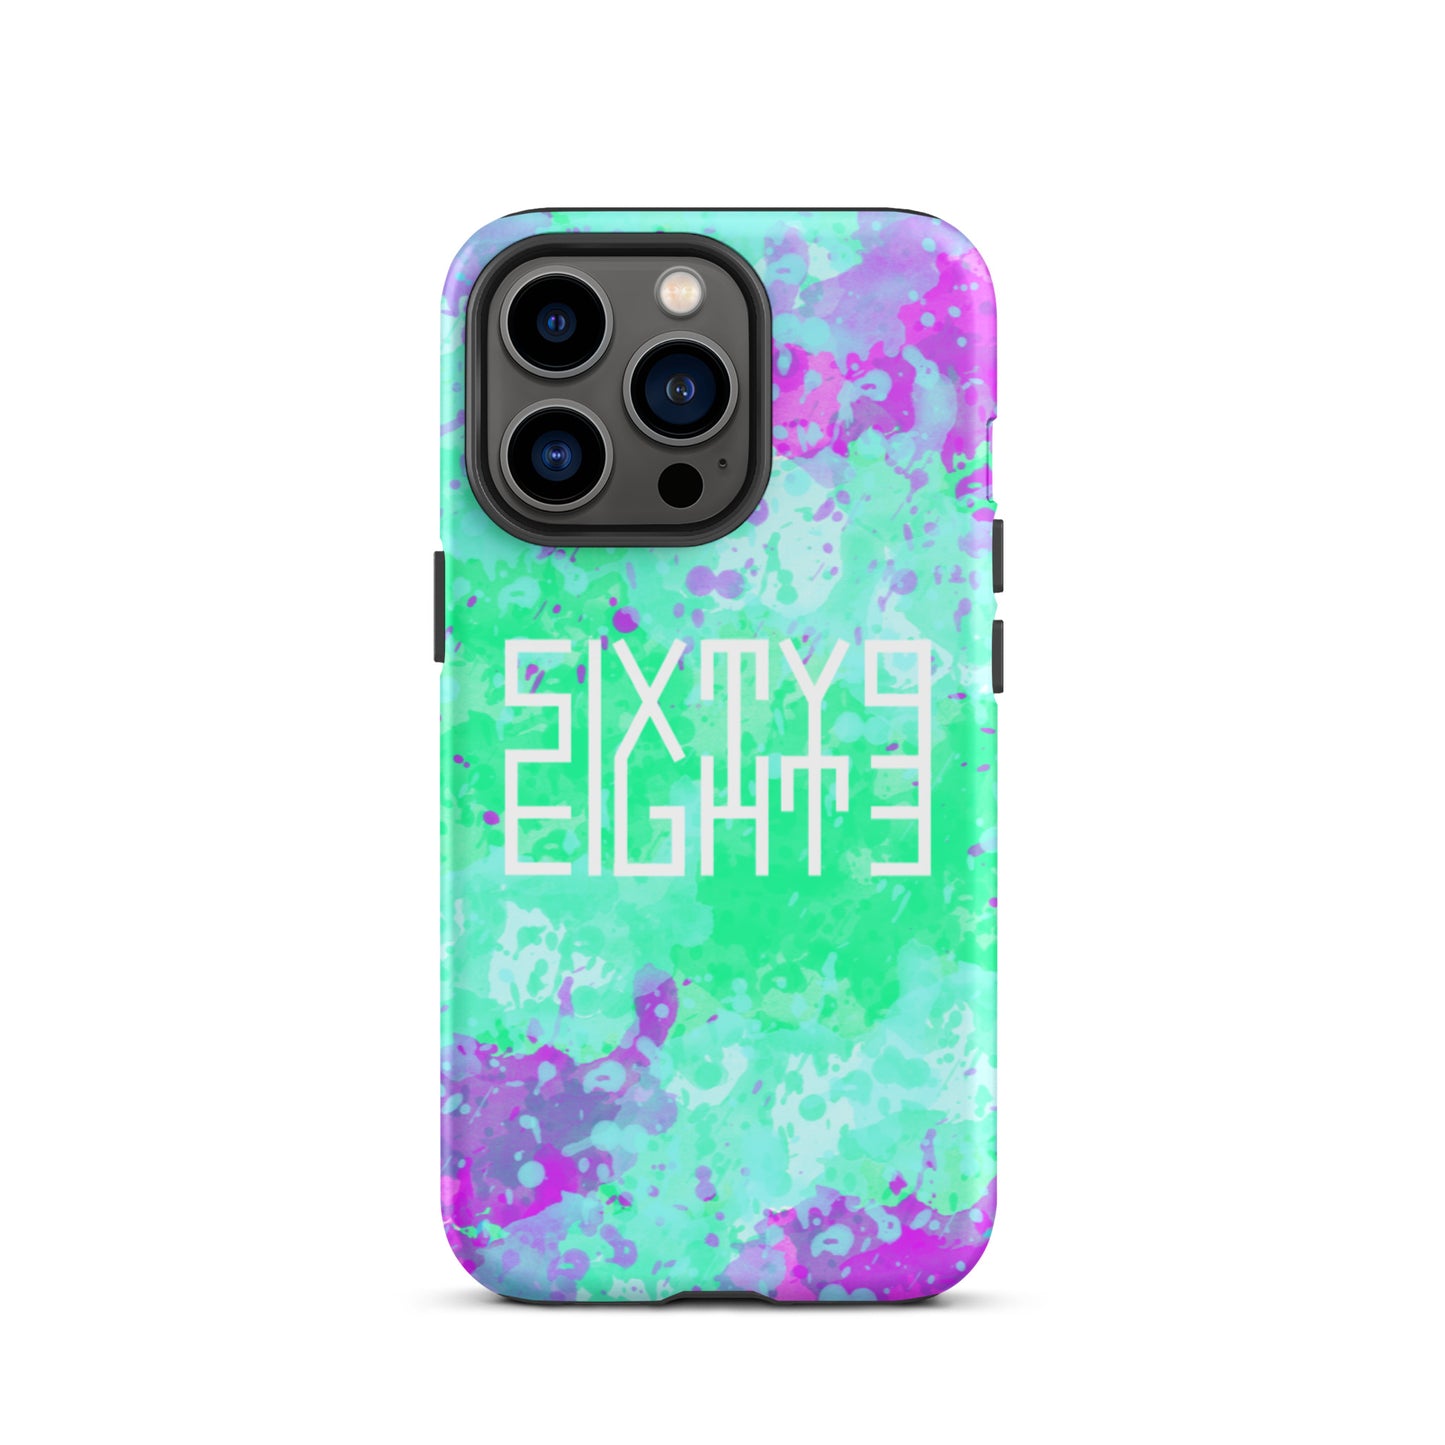 Sixty Eight 93 Logo White Incredible Marble Blue Tough iPhone Case